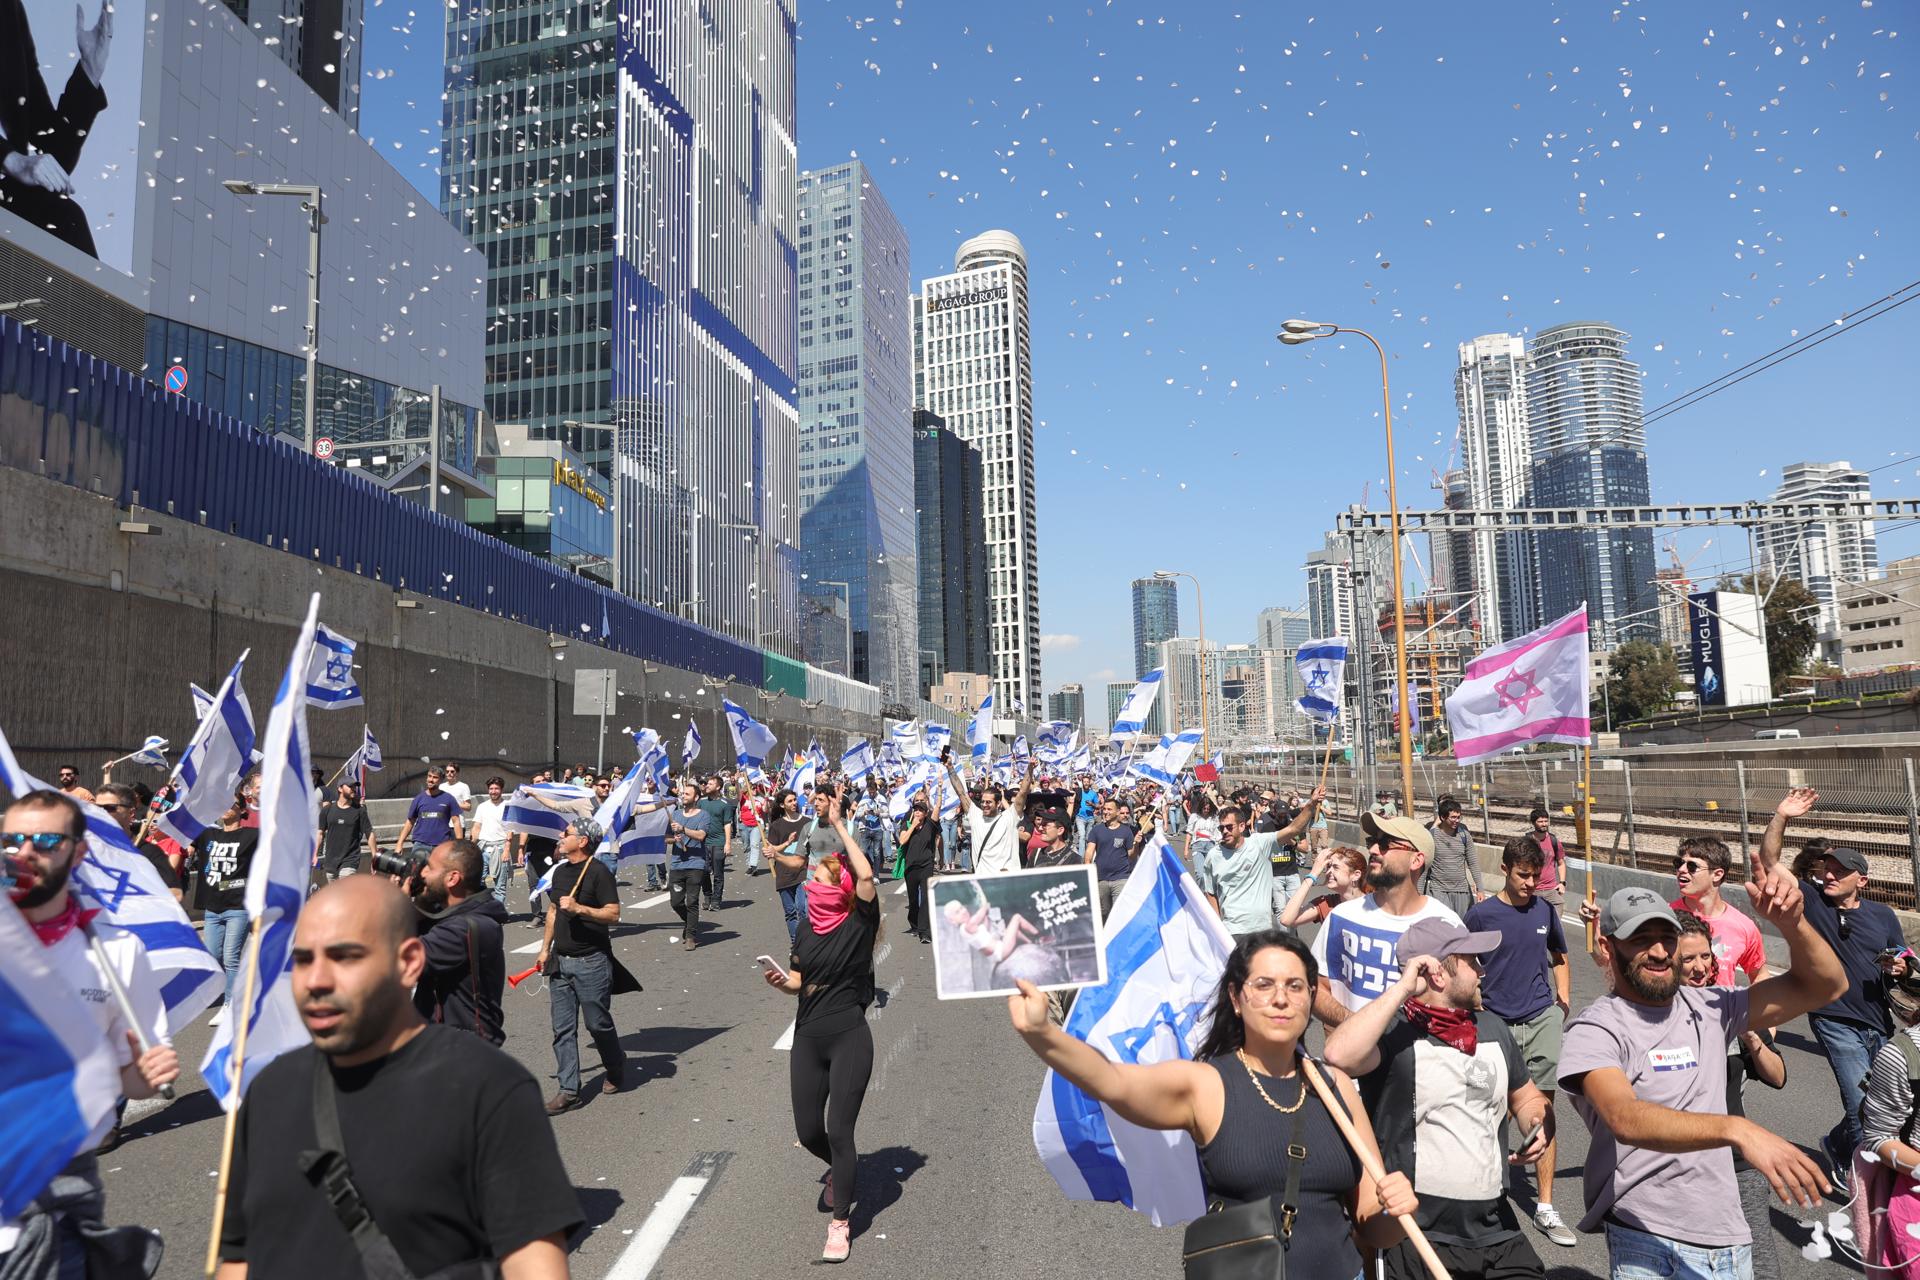 Protesters wave Israeli flags and shout slogans as they walk along Ayalon main highway during a protest against the Israeli government's plan to reform the justice system, in Tel Aviv, Israel, 16 March 2023. EFE/EPA/ABIR SULTAN